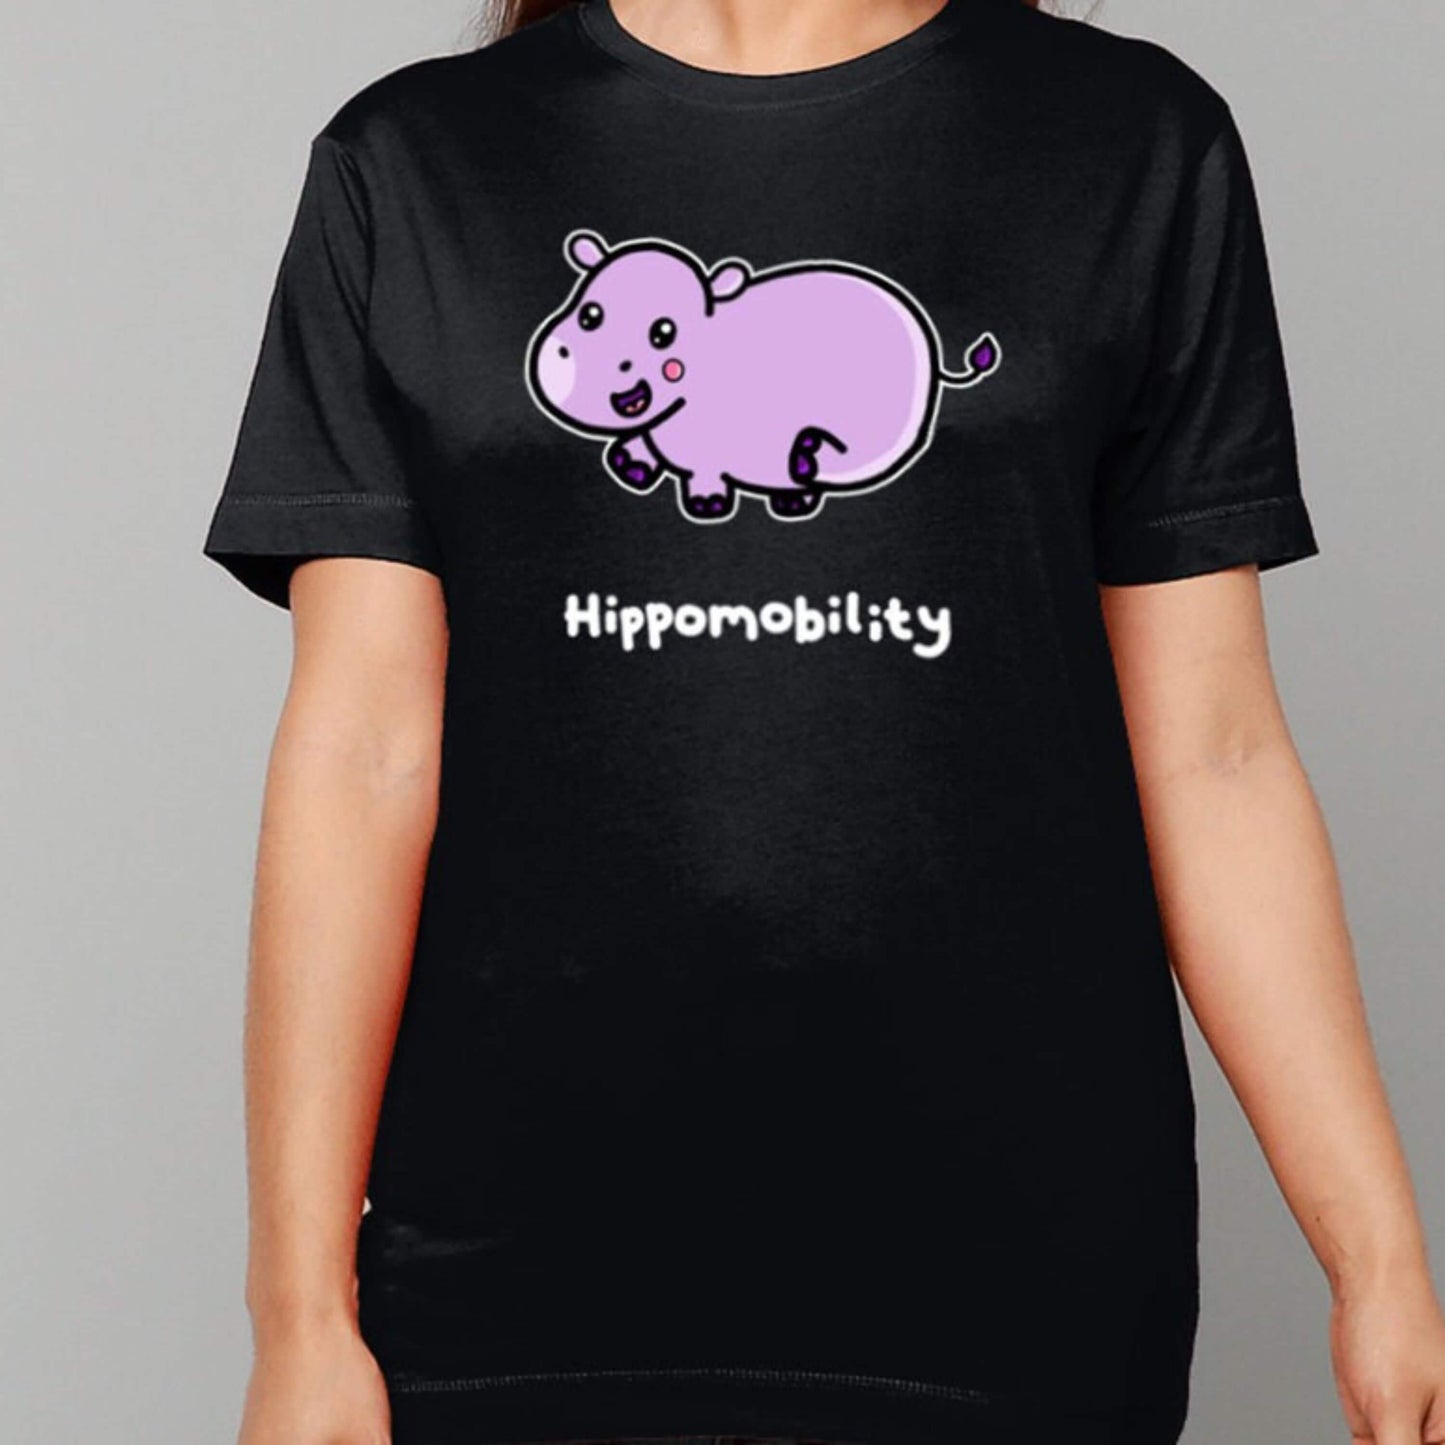 femme person wearing Hippomobility Tee - Hyper Mobility Tee standing in front of a grey backdrop. The black t-shirt has an illustration of a pink happy hippo with 'hippomobility' in white text underneath. The hand drawn design is made to raise awareness for hyper mobility.